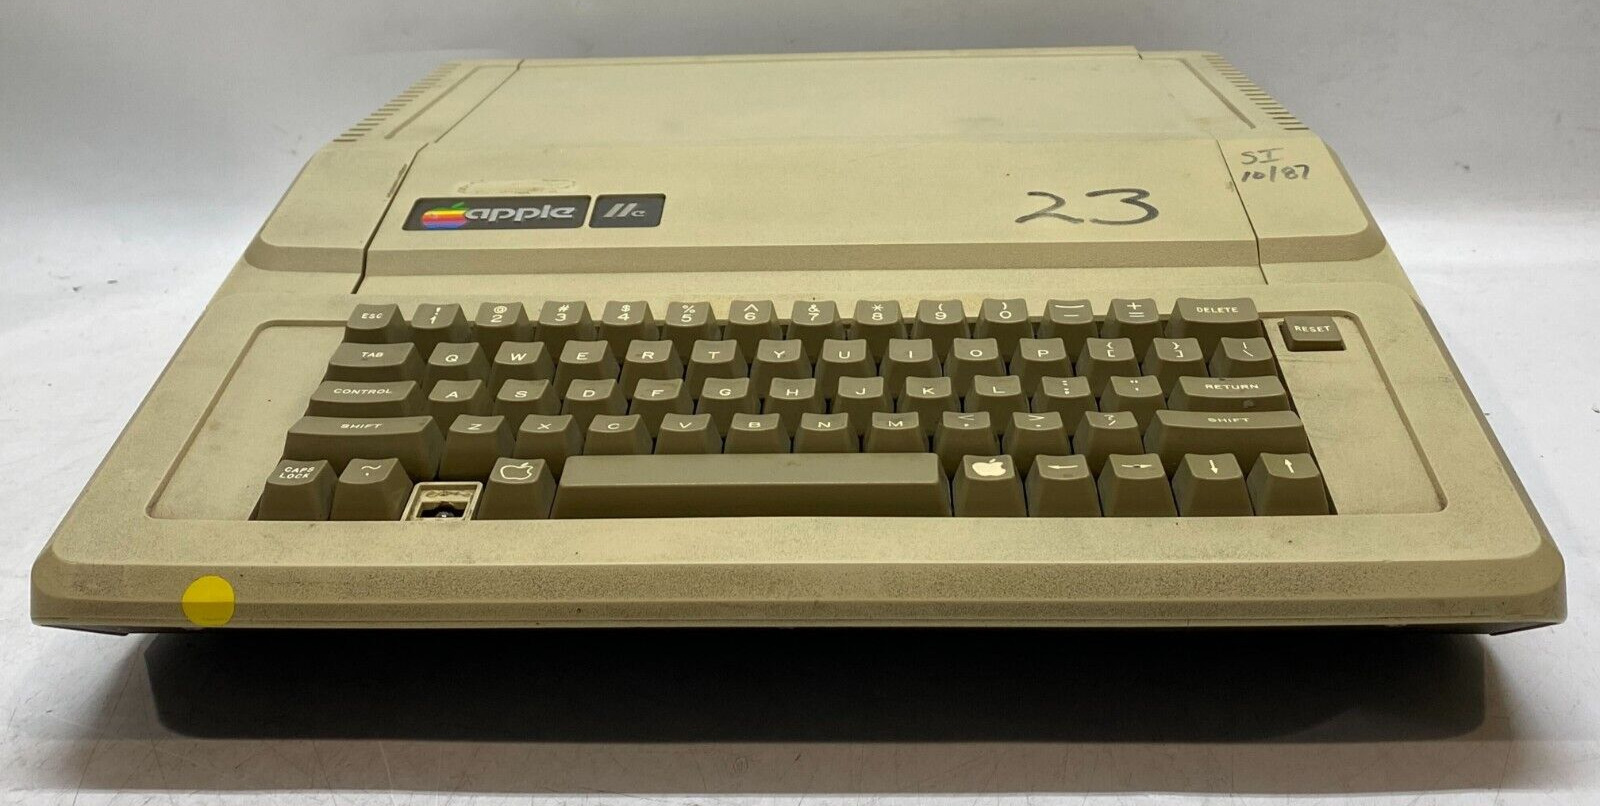 Apple IIe A2S2064 Vintage Personal Computer (825-0406-A)